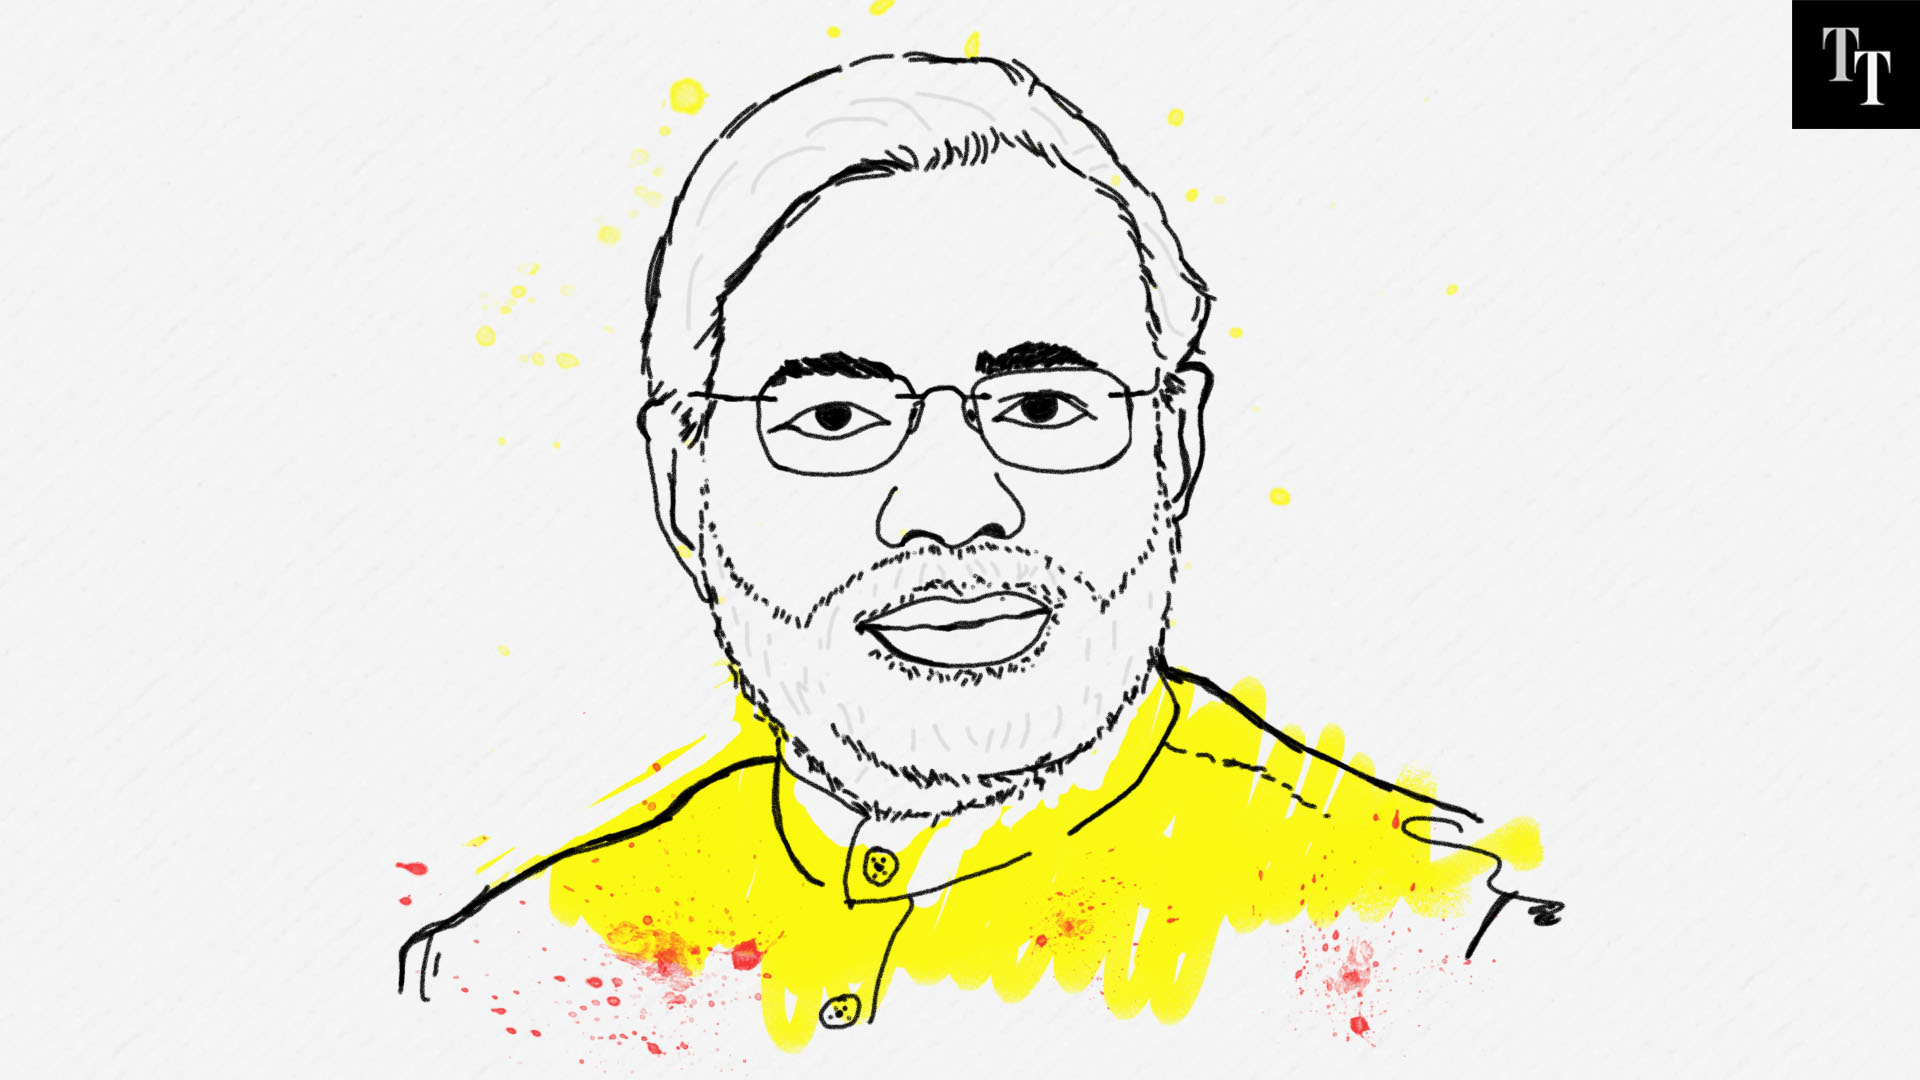 This year, Modi has left his Vadnagar seat and is contesting only from Varanasi